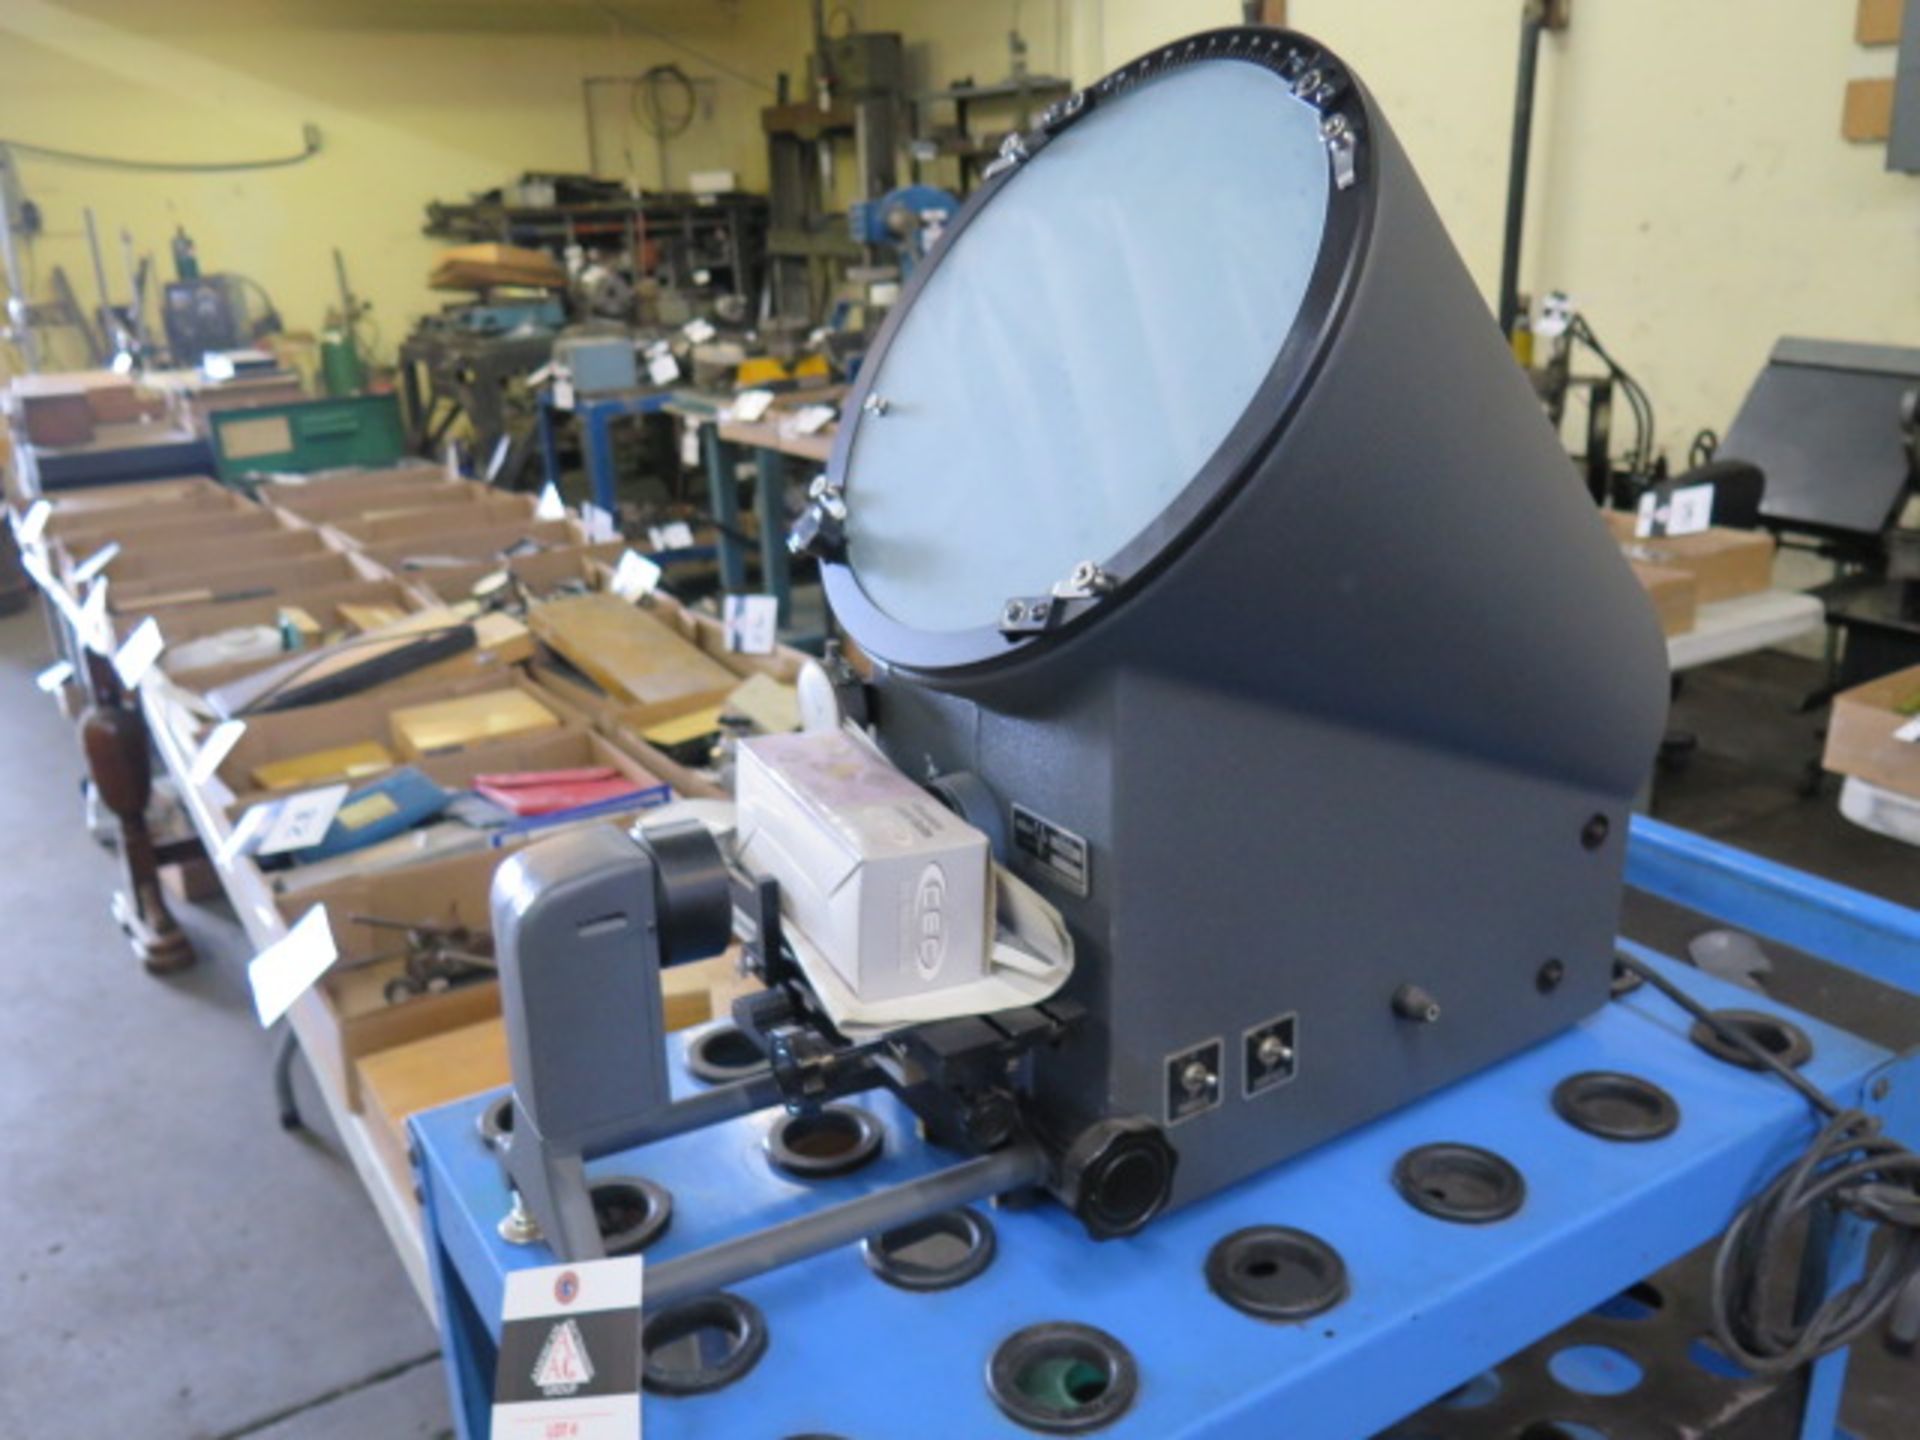 MicroVu mdl. 500HP 12” Table Model Optical Comparator s/n 25521 (SOLD AS-IS - NO WARRANTY) - Image 2 of 7